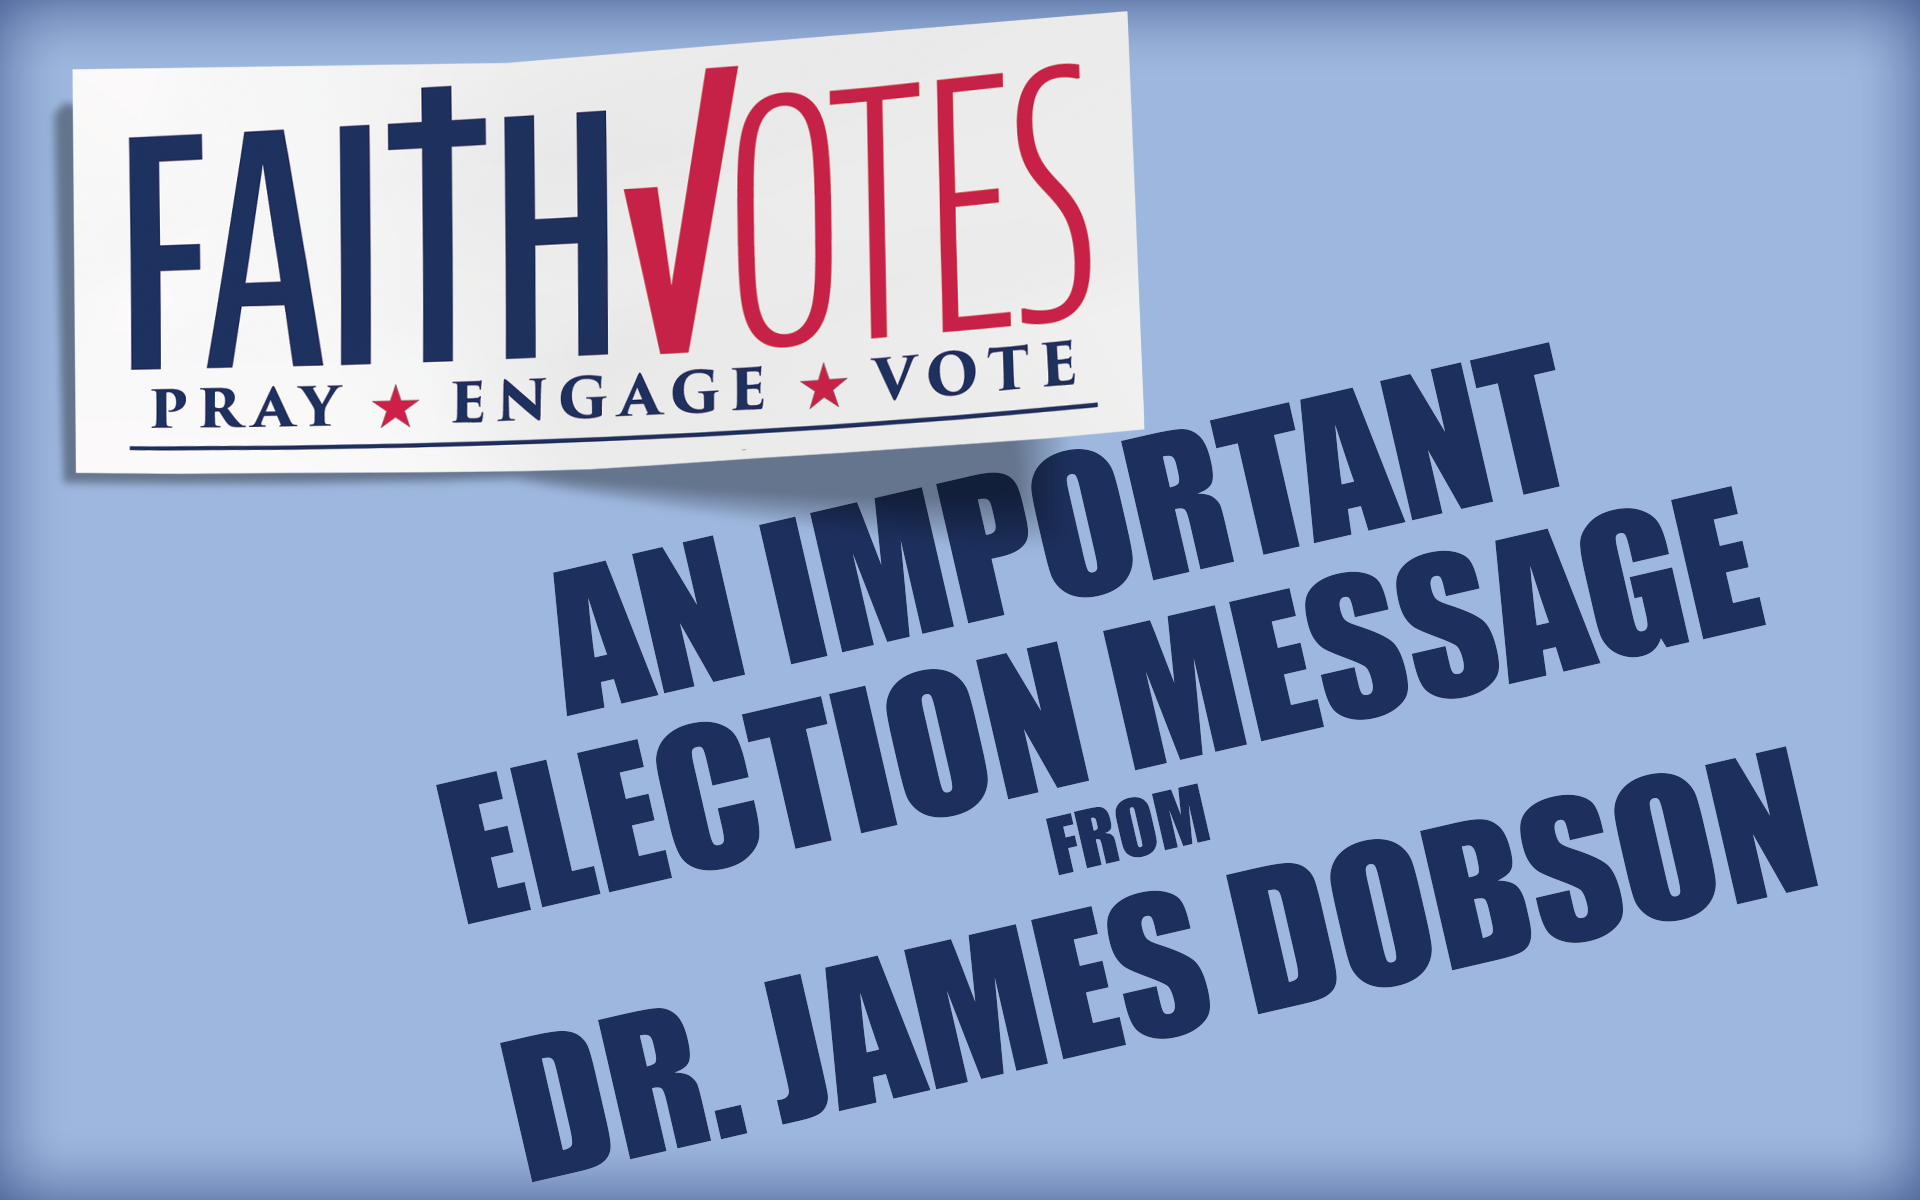 An Important Election Message From Dr. James Dobson